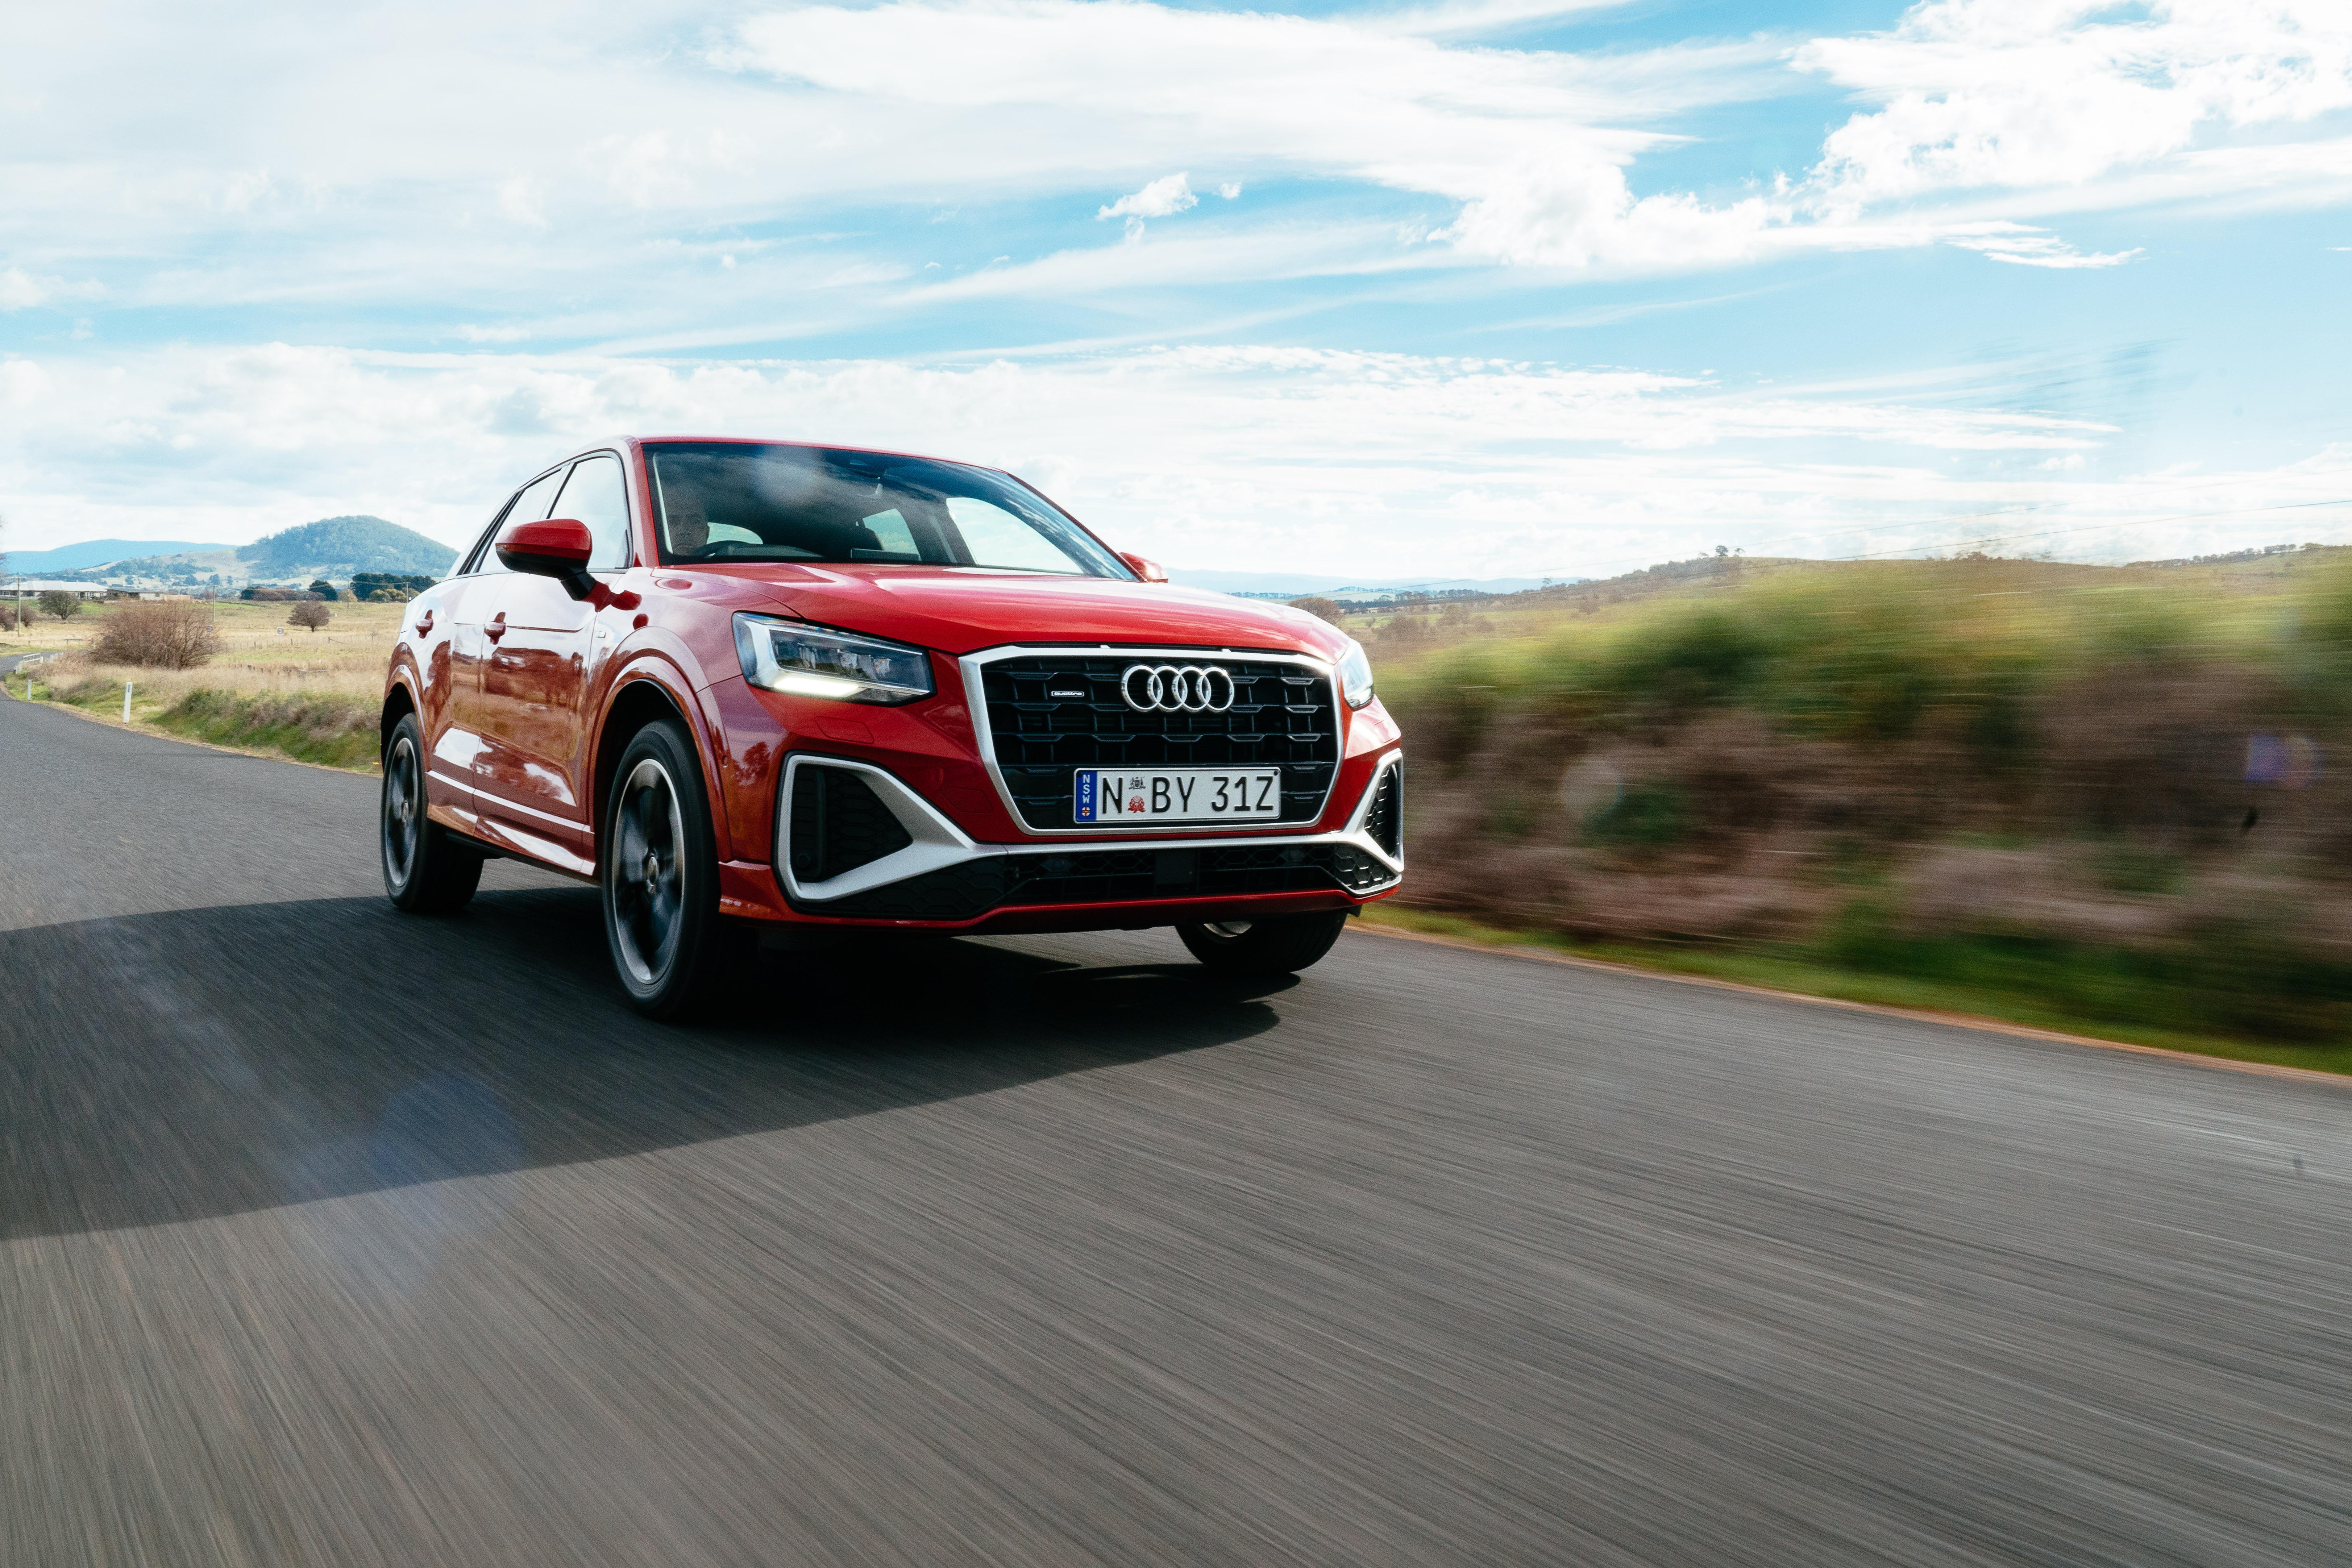 2021 Audi Q2 Debuts With Refreshed, Sharper Styling